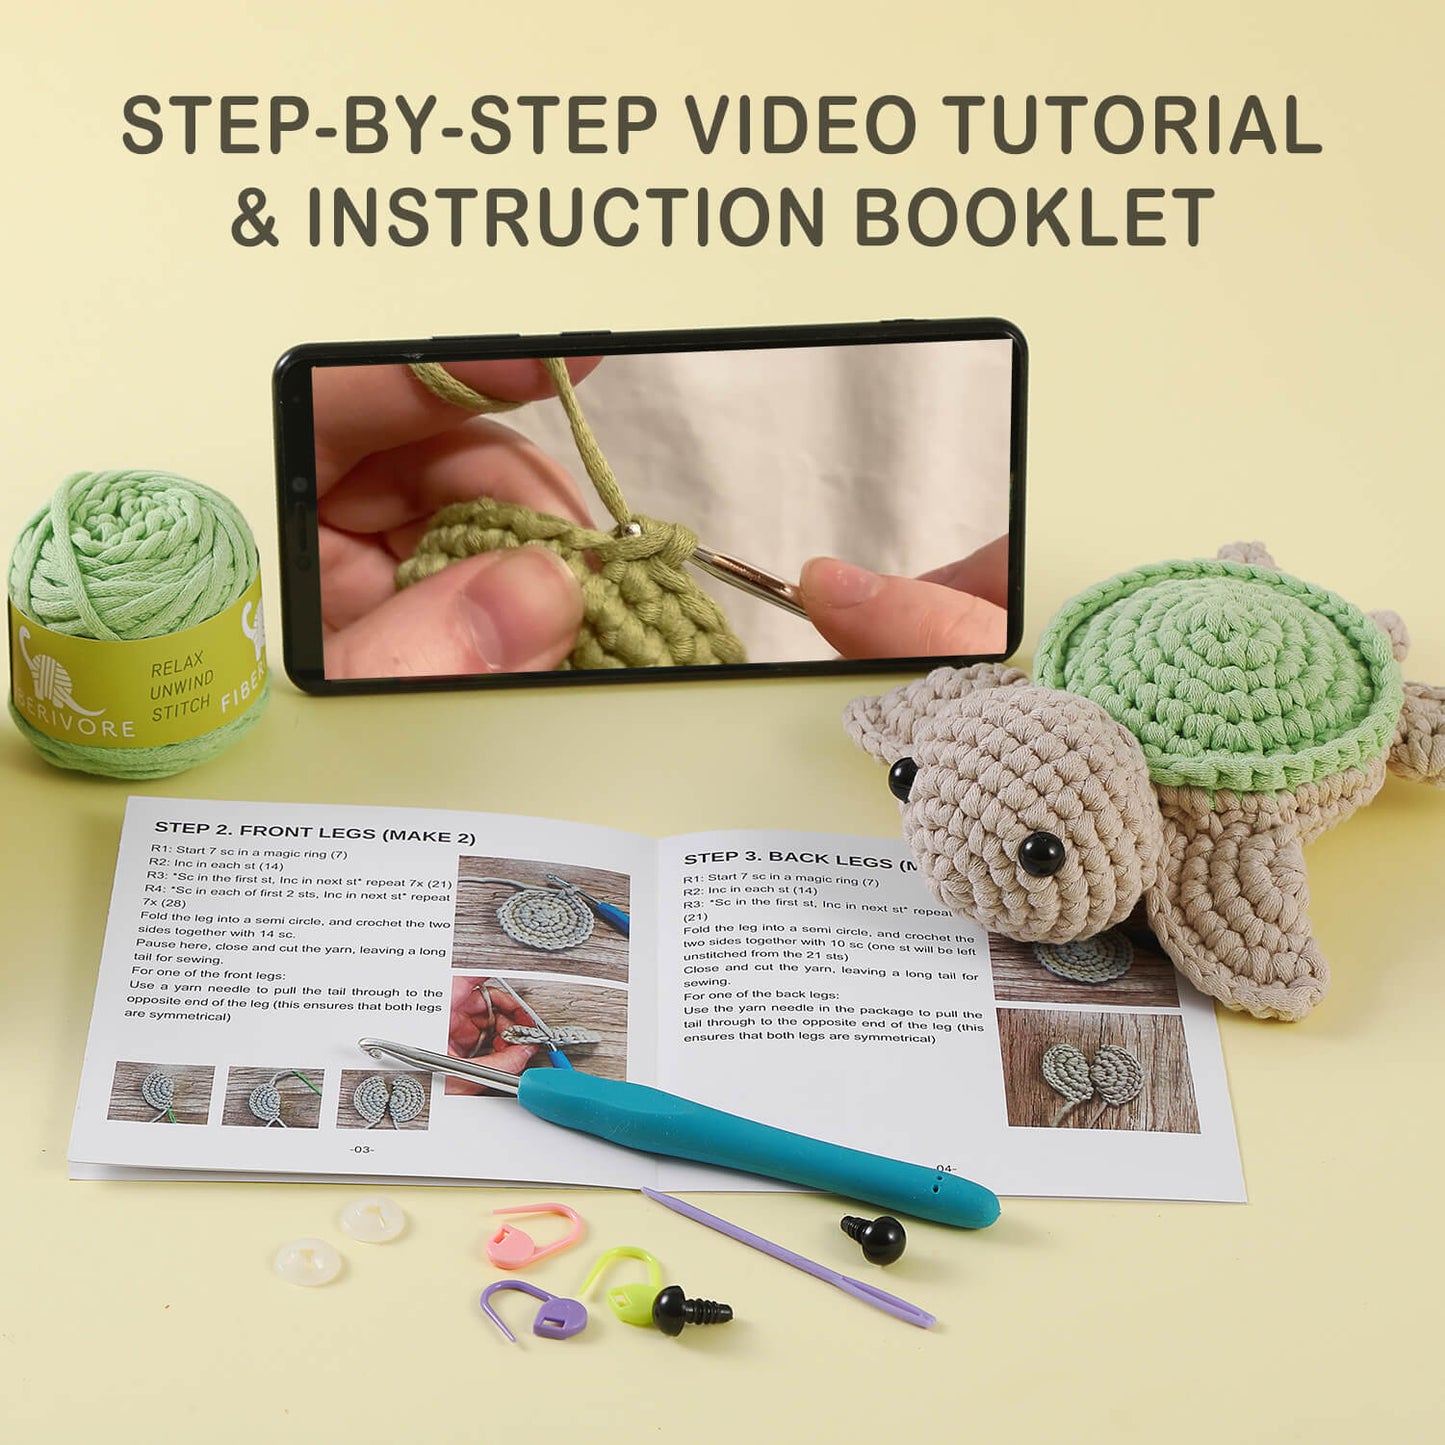 Crochet Kit for Beginners, Learn to Crochet Kits for Adults and Kids, Animal Amigurumi Crochet Kit with Step-by-Step Video Tutorials for Right- and Left-Handed People, Terry The Turtle Kit